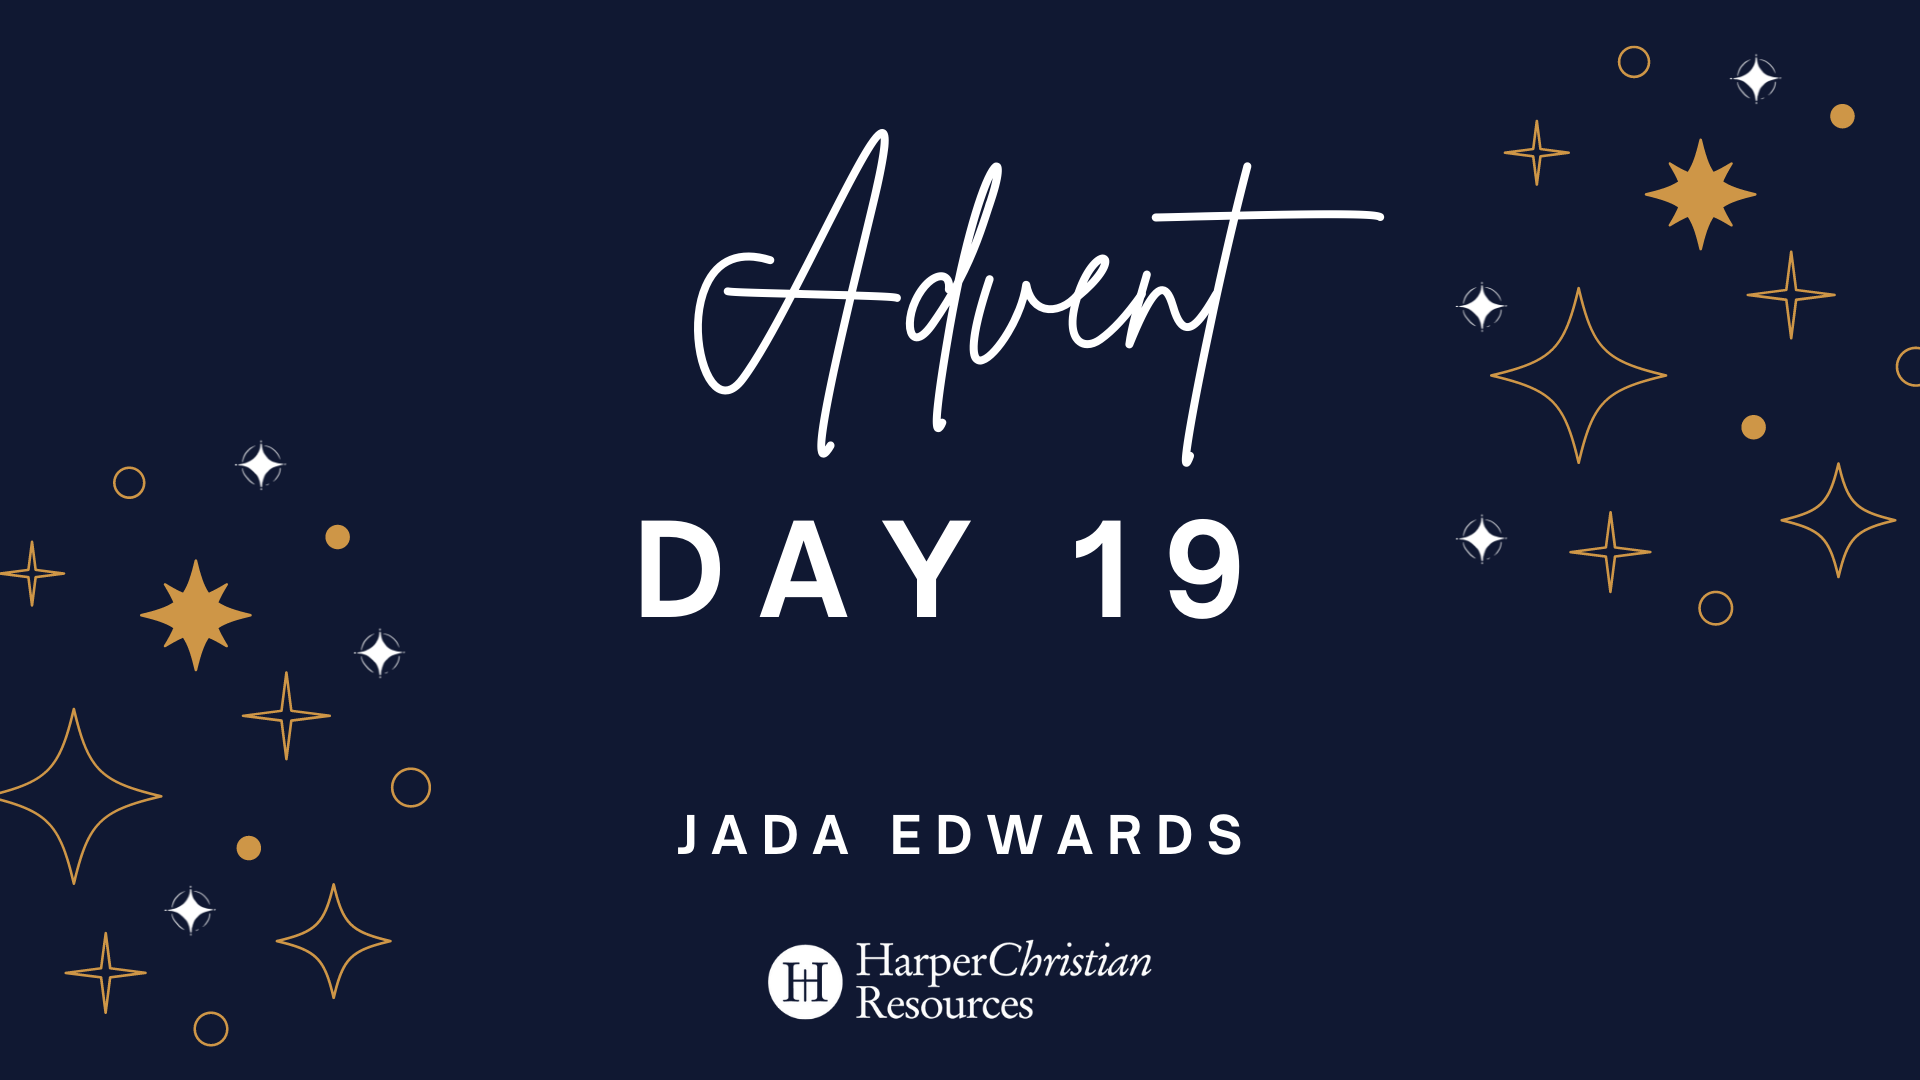 Advent Day 19: A message from Jada Edwards